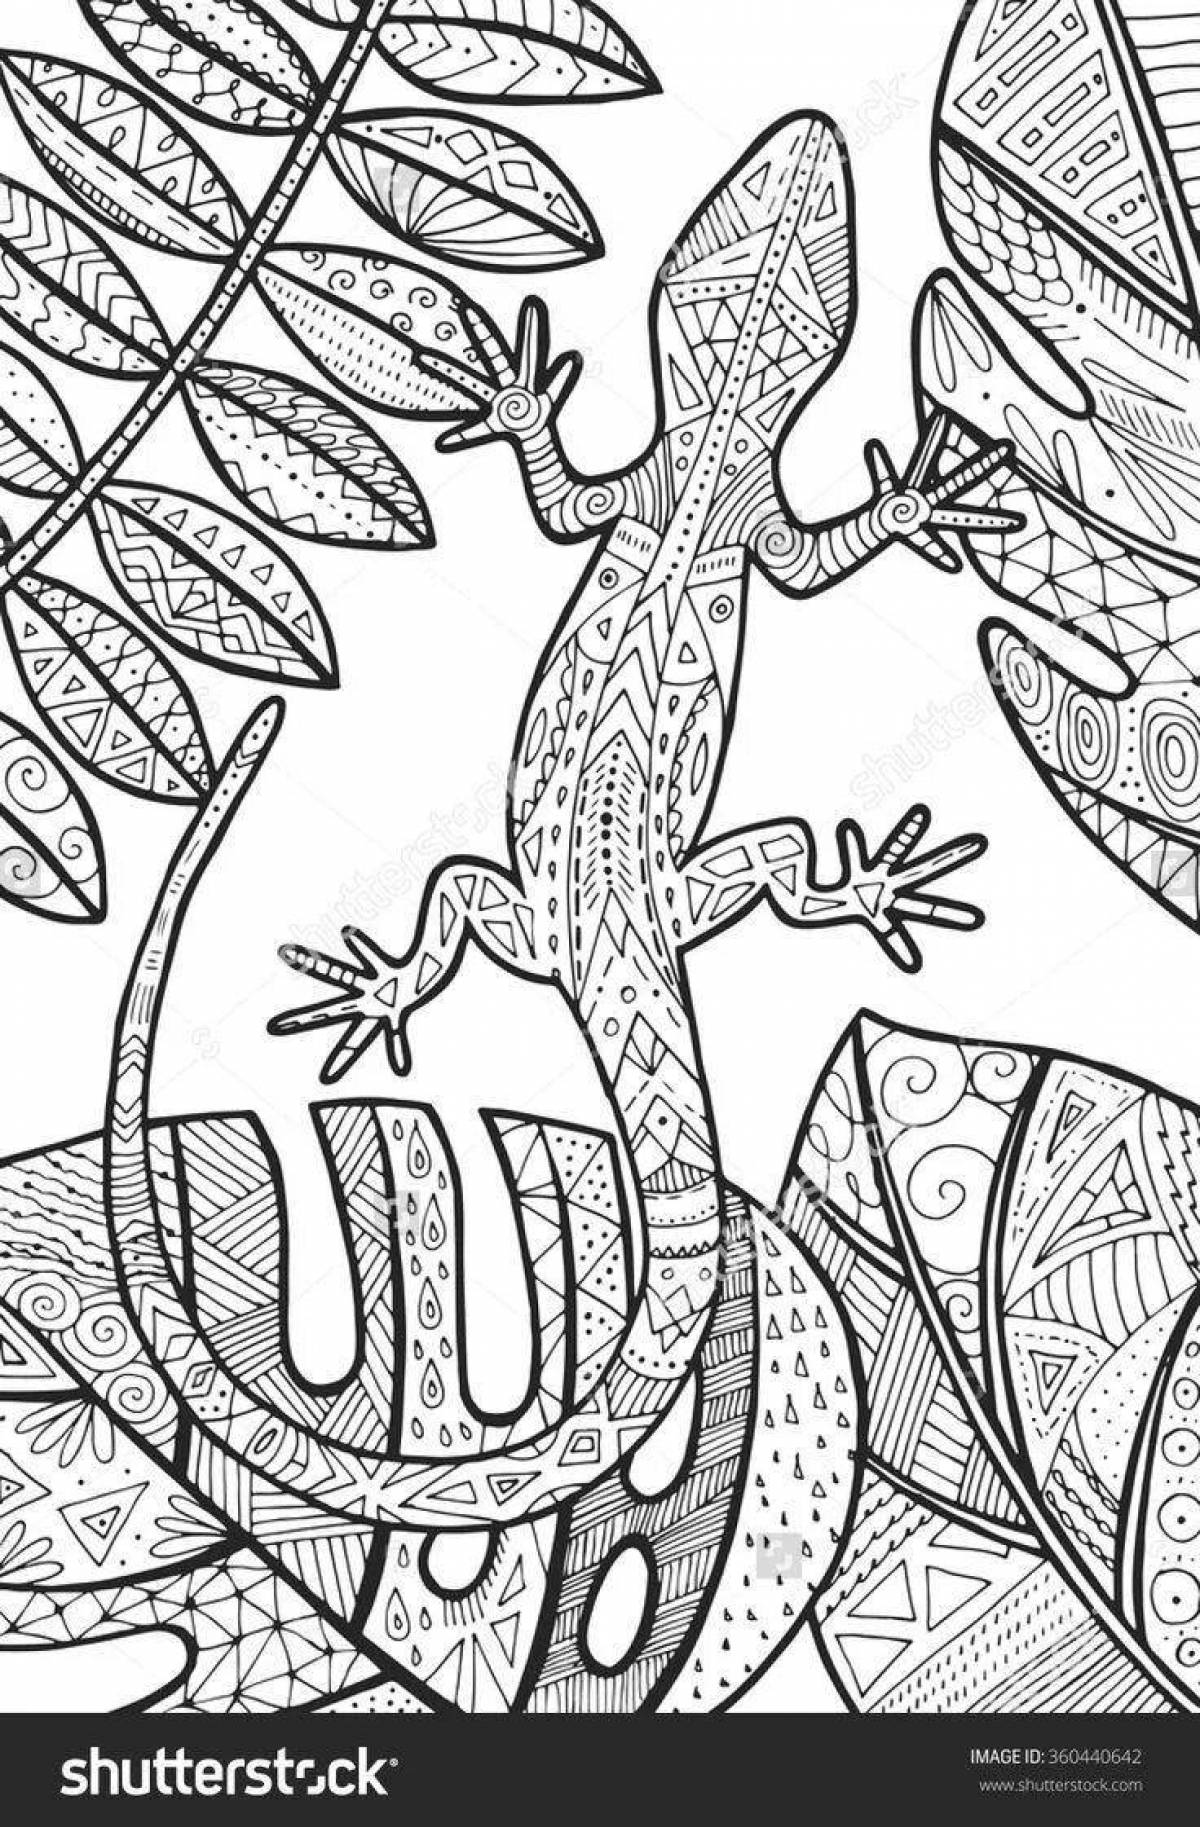 Sublimely coloring page mistress of the copper mountain lizard